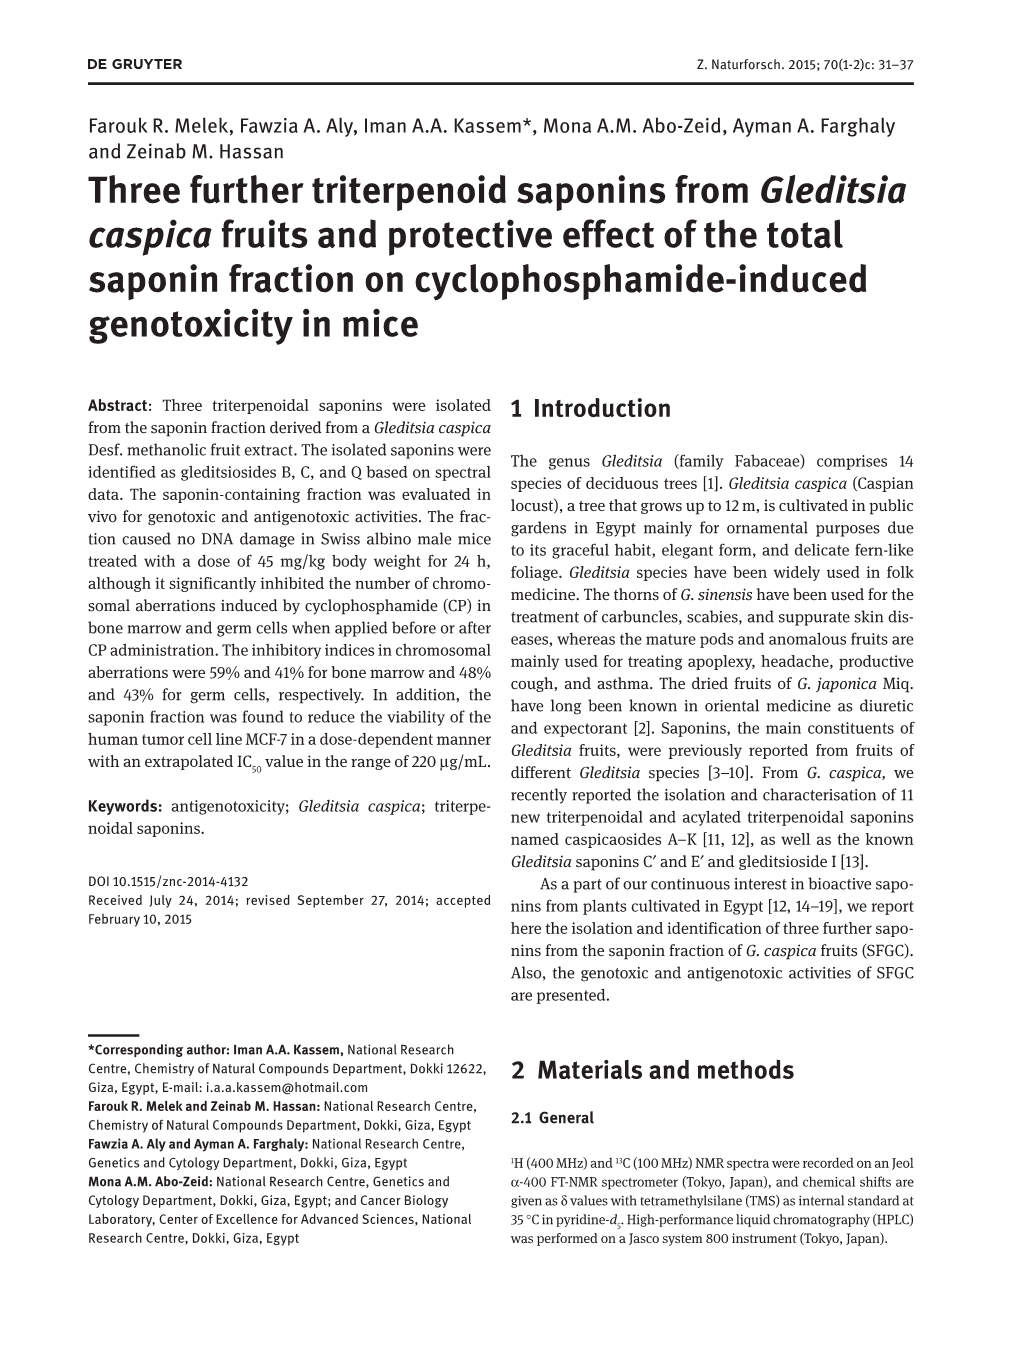 Three Further Triterpenoid Saponins from Gleditsia Caspica Fruits and Protective Effect of the Total Saponin Fraction on Cyclophosphamide-Induced Genotoxicity in Mice